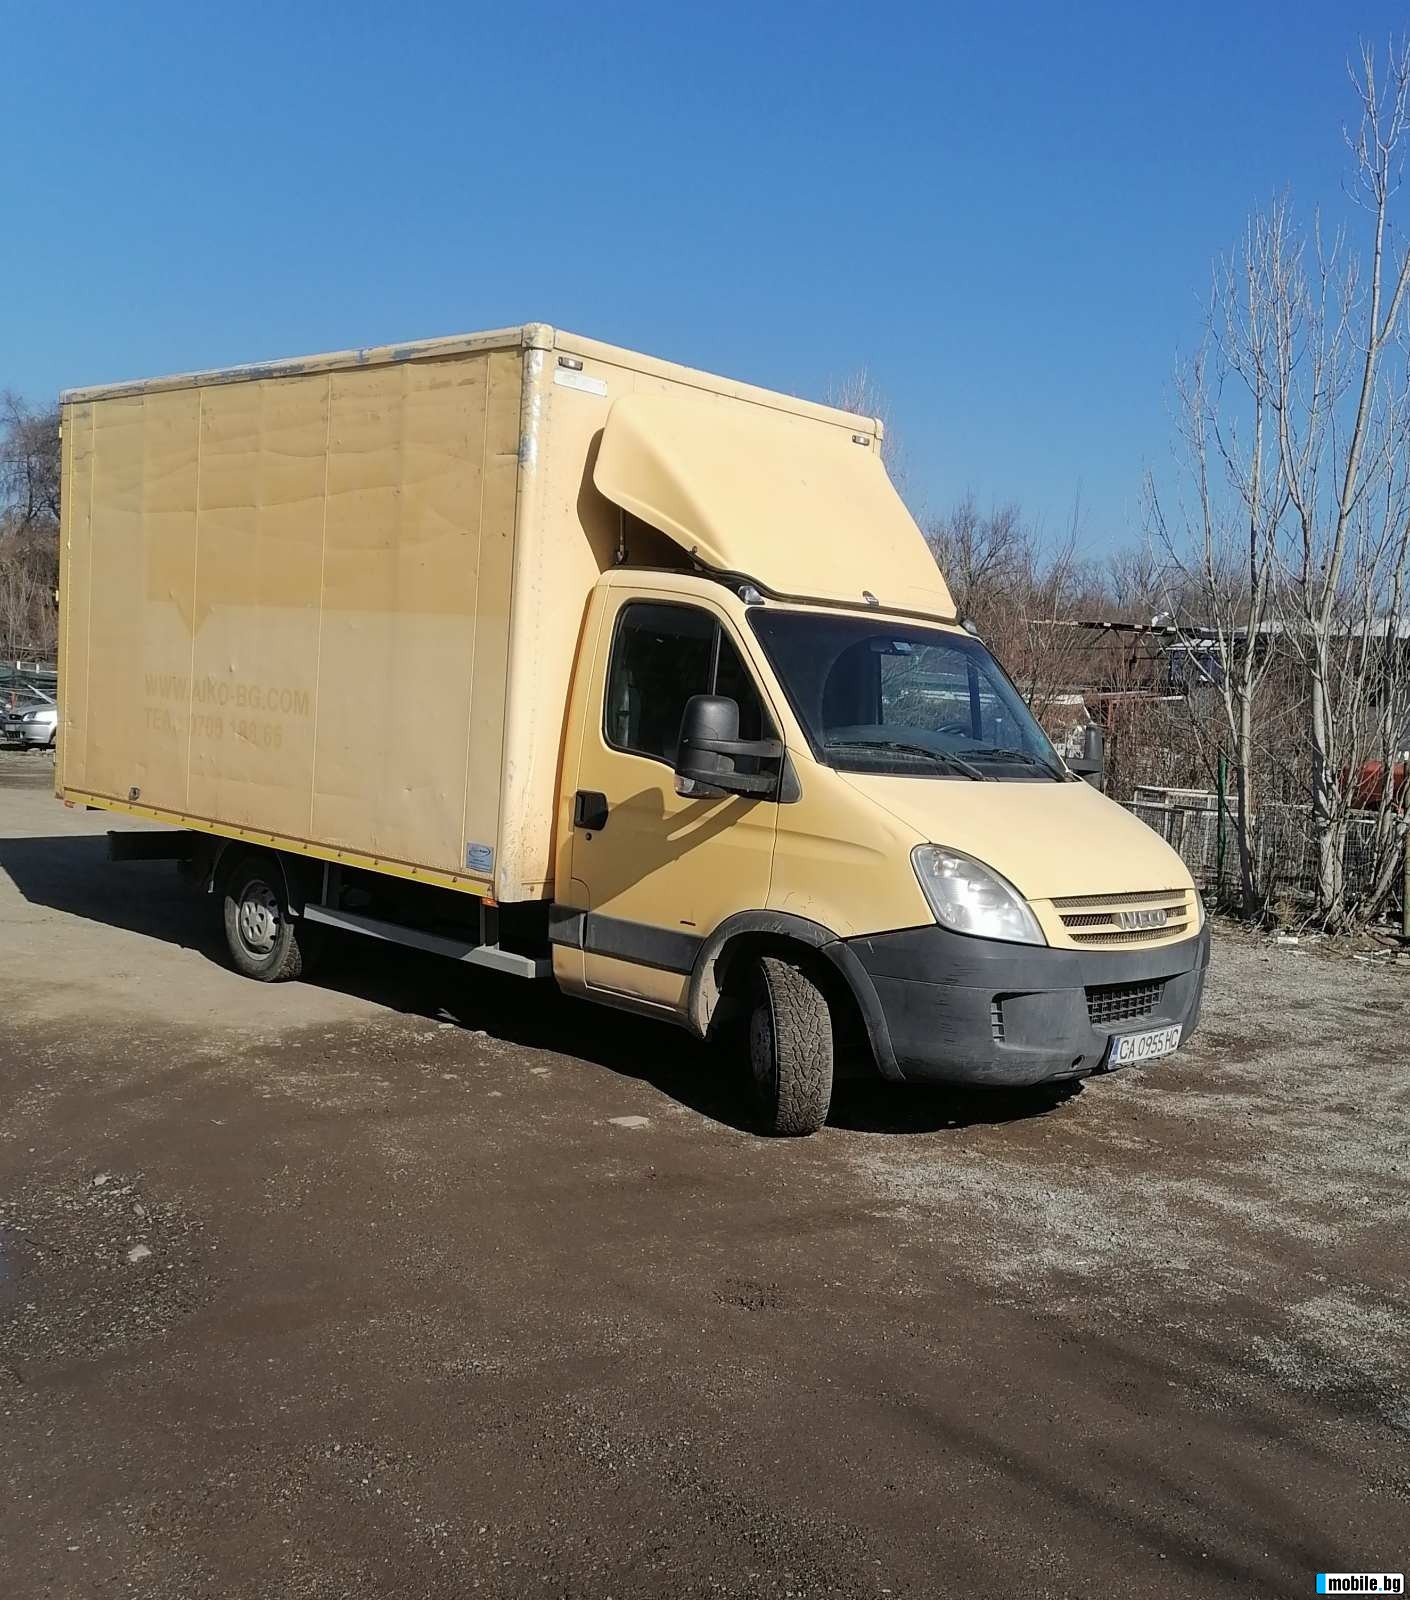 Iveco Daily 35s12  | Mobile.bg   3